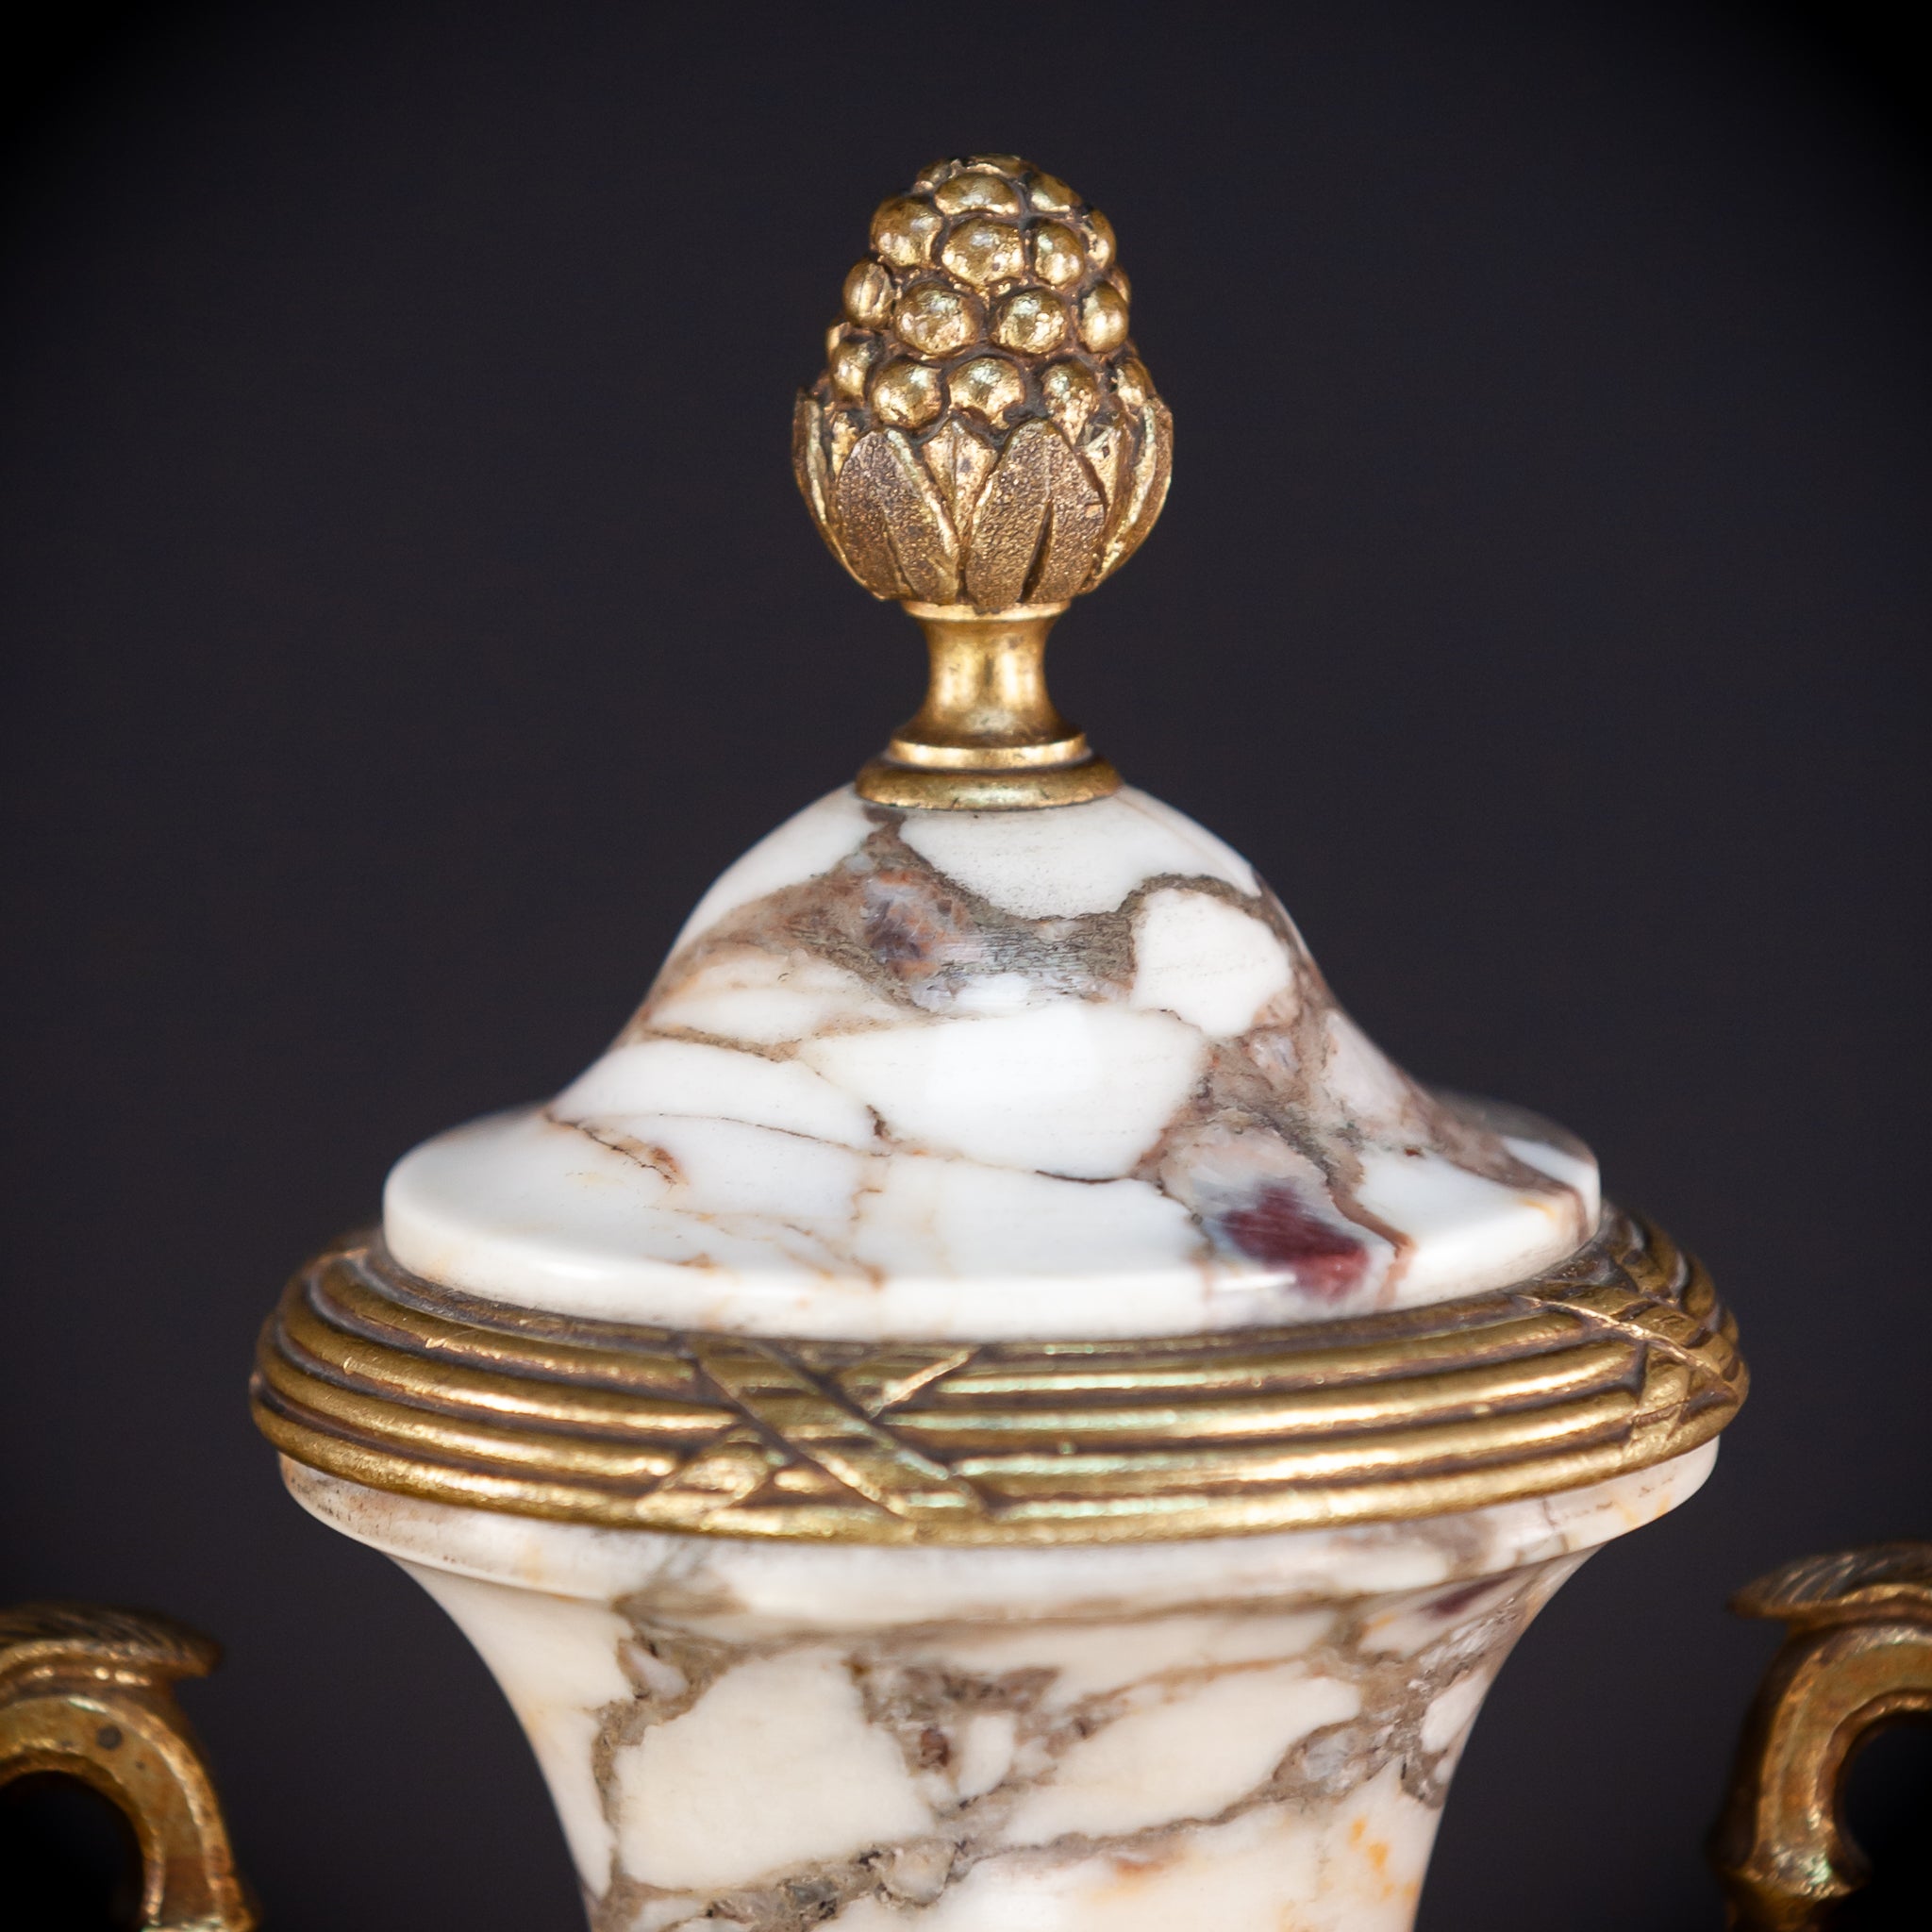 Pair of Urns | White Marble and Gilt Bronze | 1800s Antique | 18.3"/ 46.5 cm